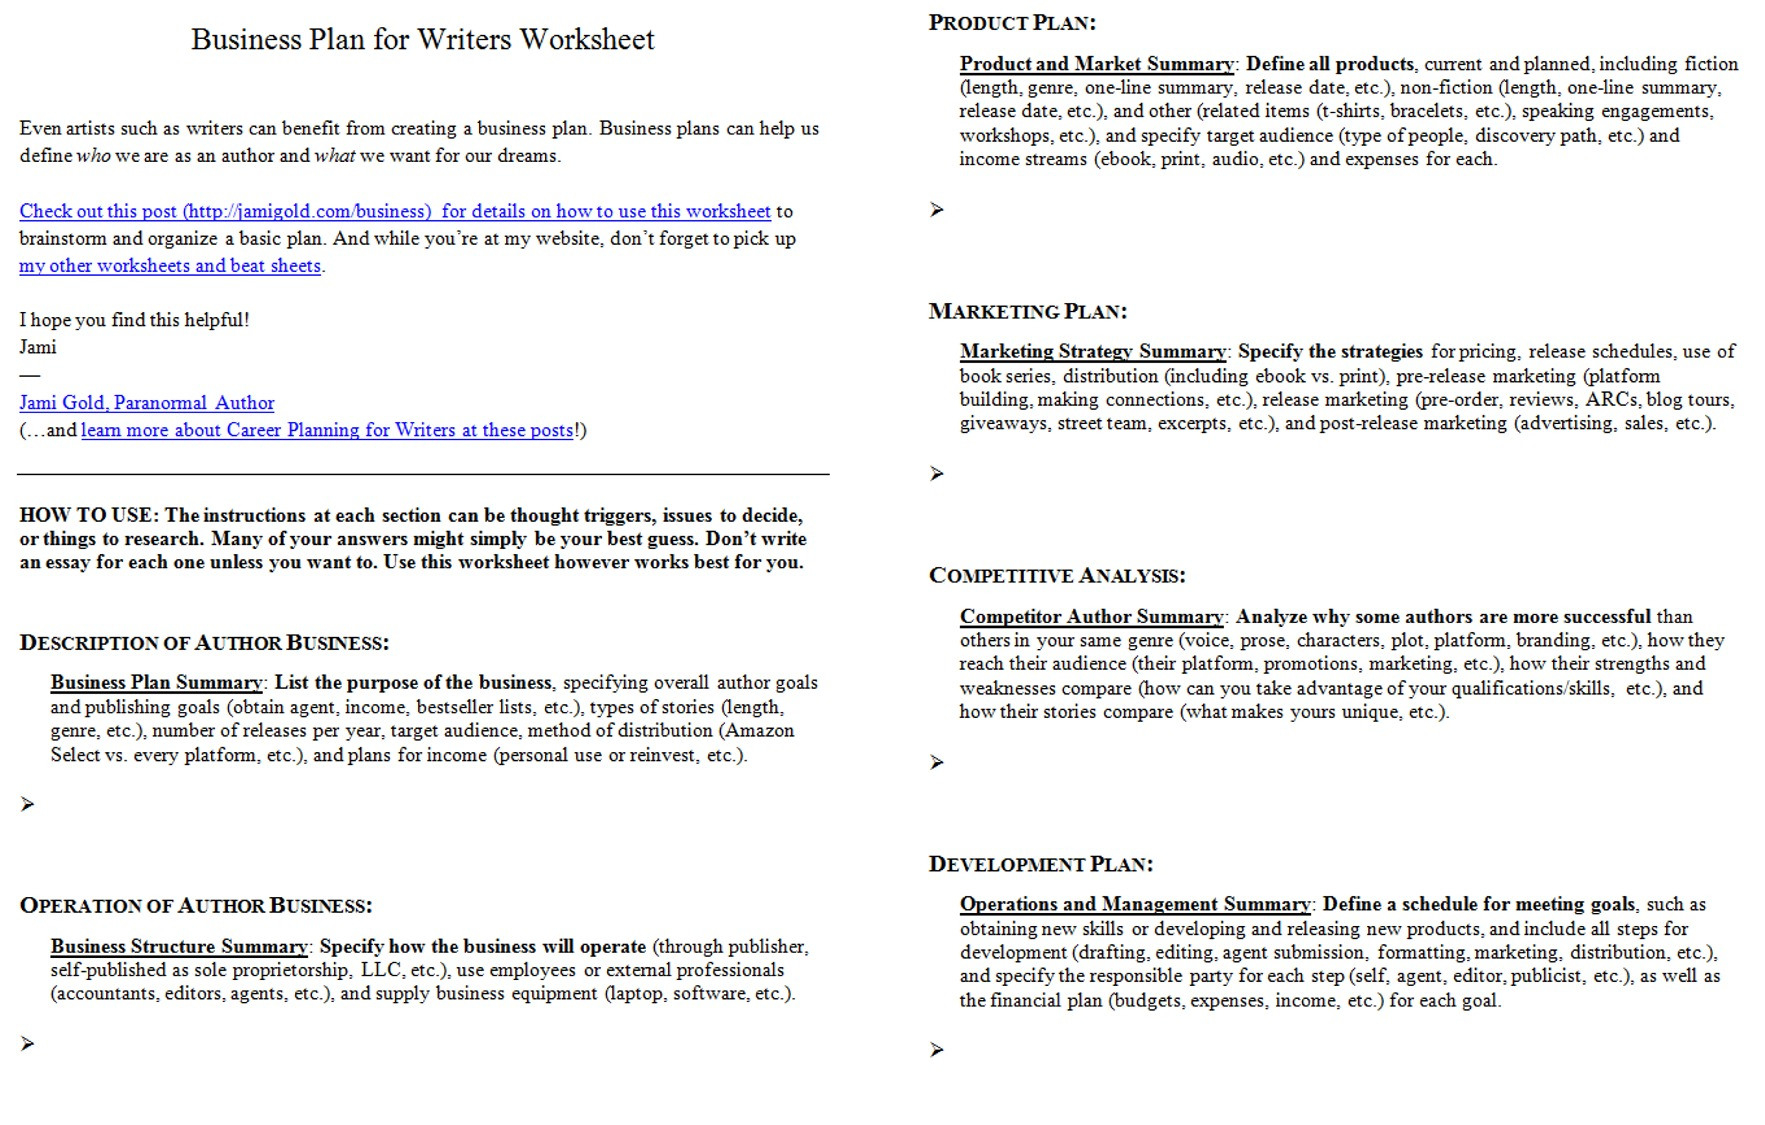 Introducing The Business Plan For Writers Worksheet  Jami